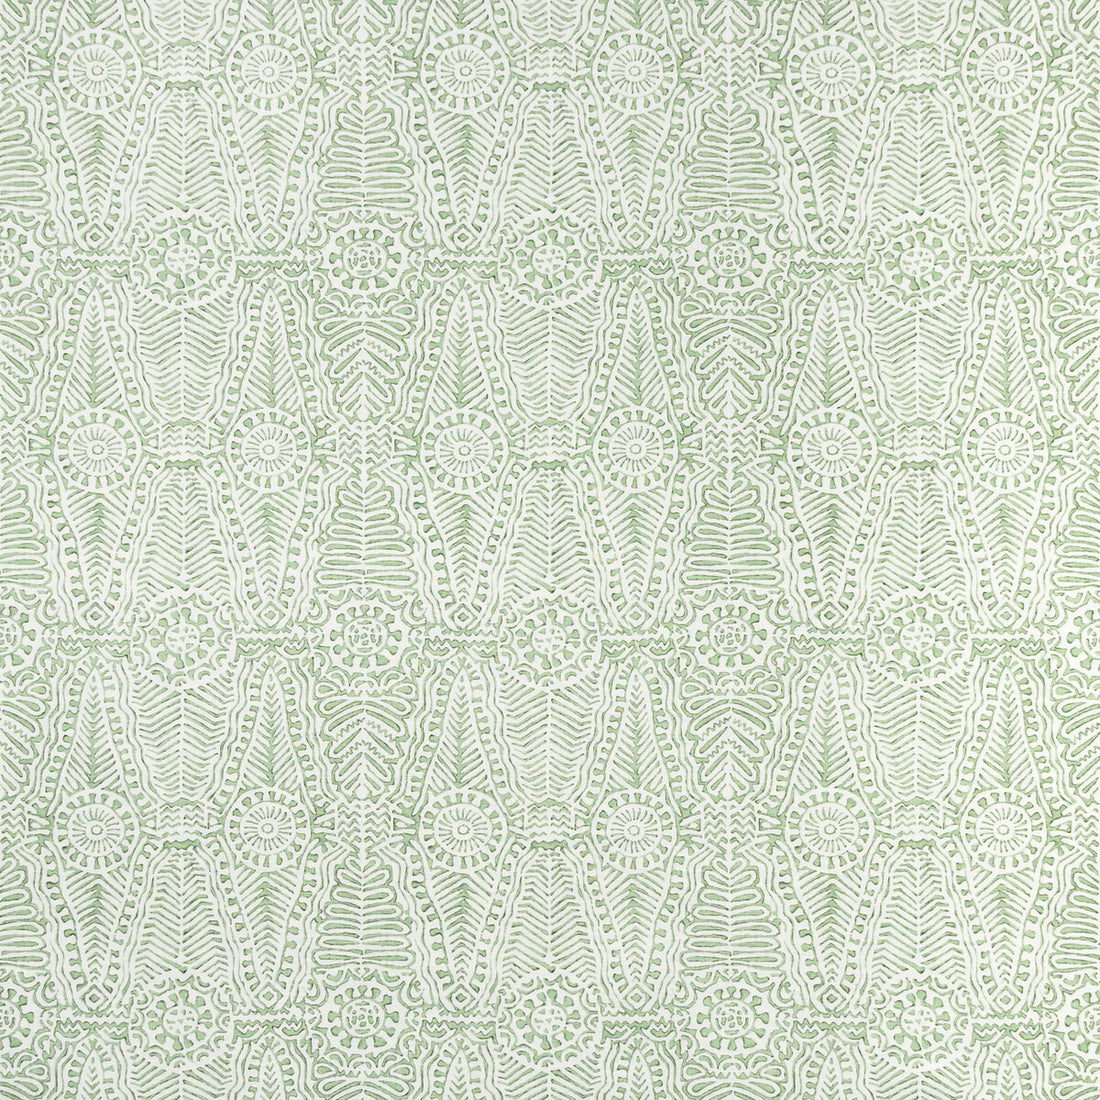 Drayton Print fabric in moss color - pattern 2020184.23.0 - by Lee Jofa in the Avondale collection